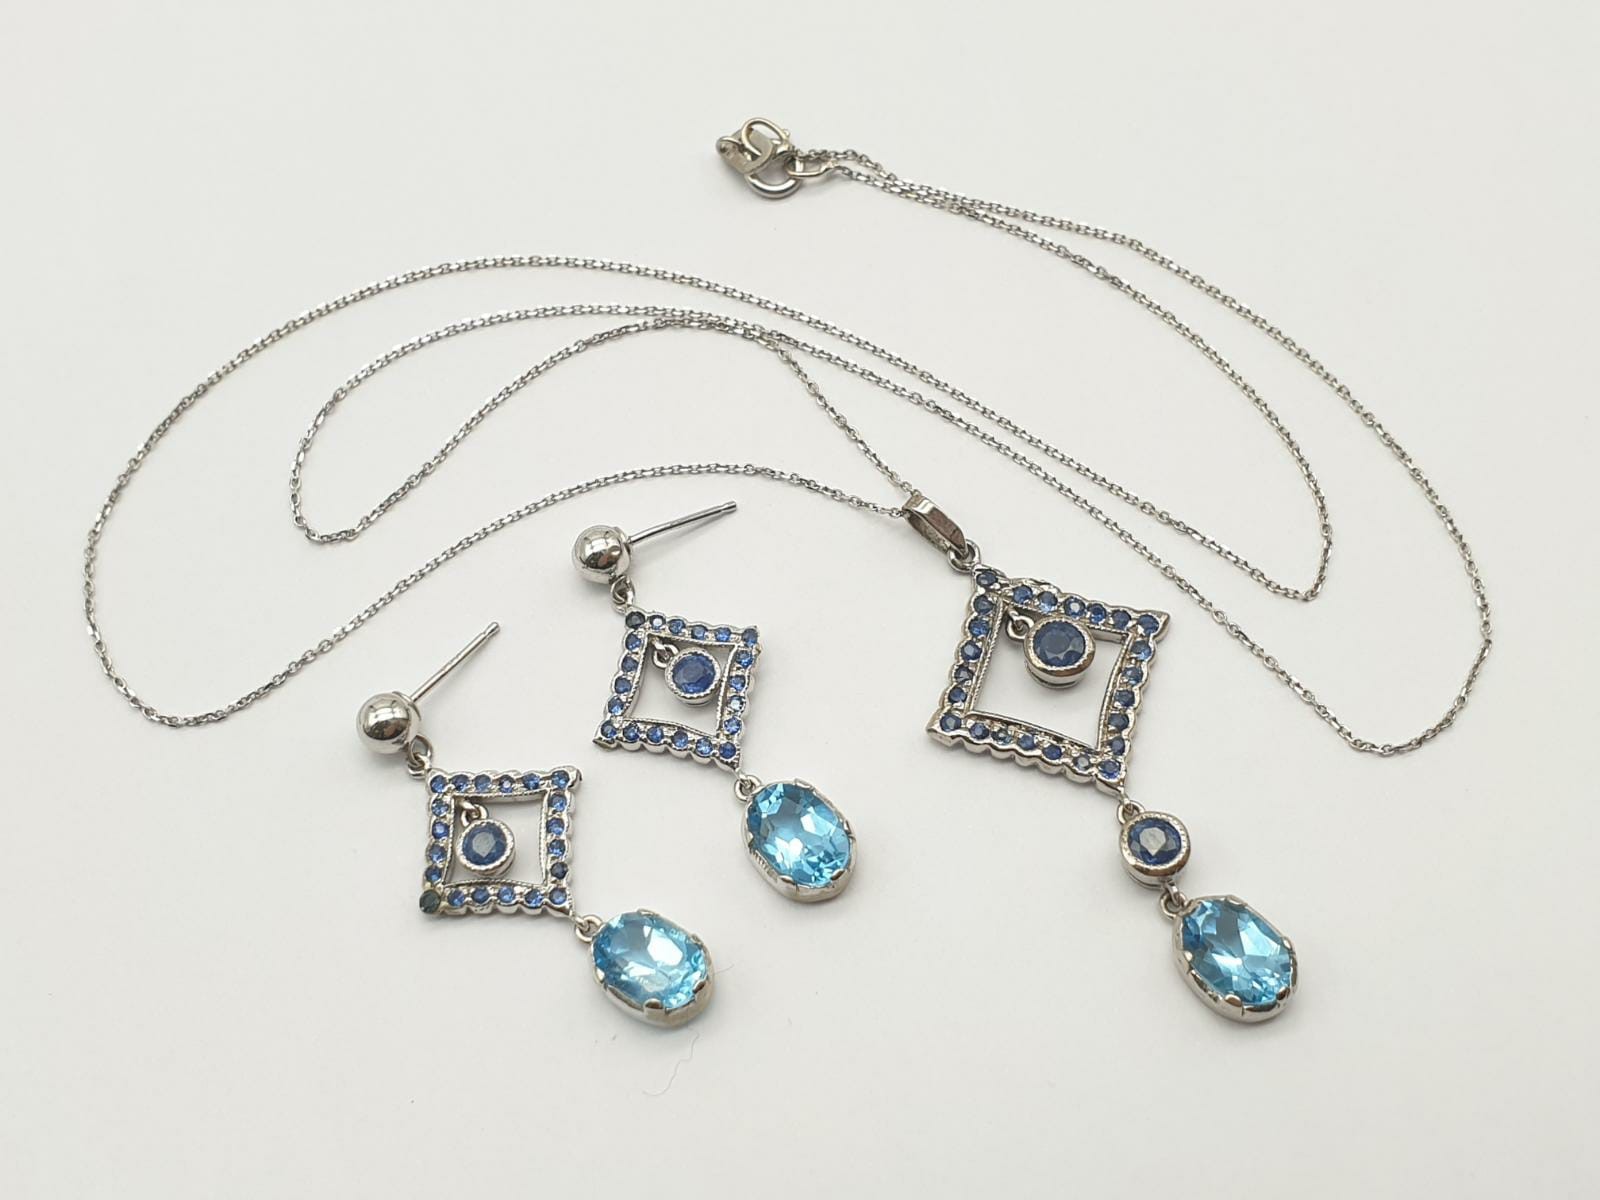 Set of 14K White Gold Sapphire Drop Earrings and Necklace. Multiple Sapphires on each piece. 46cm